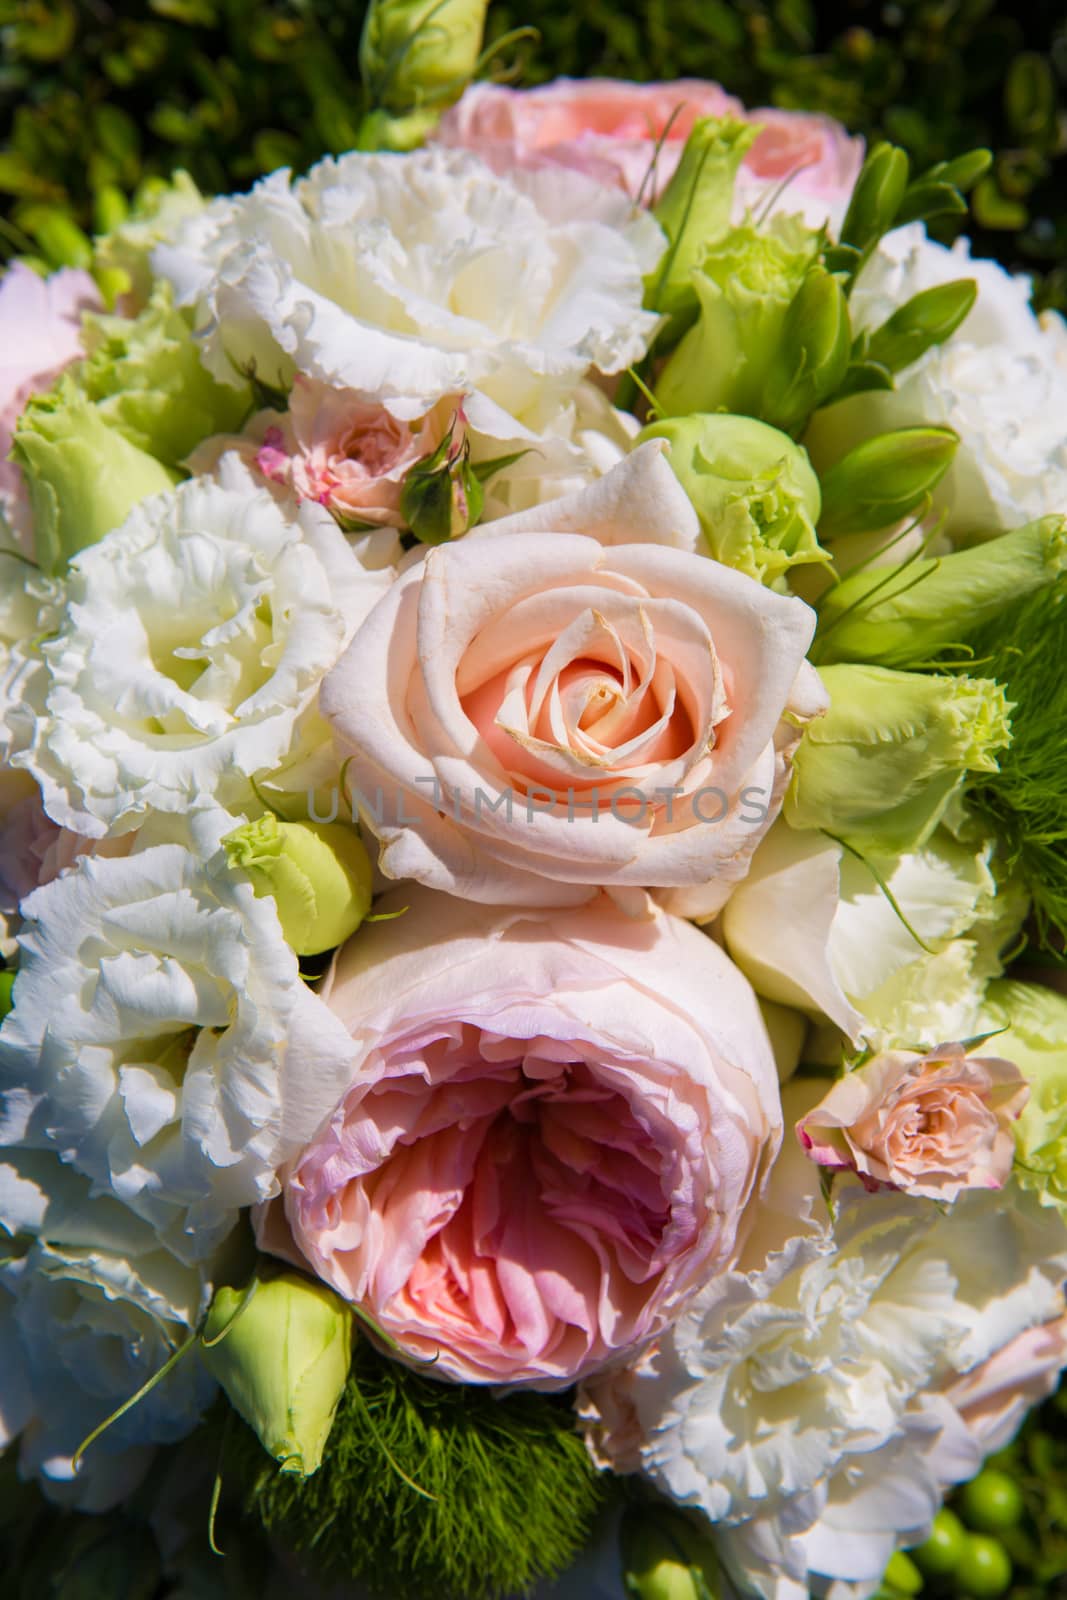 The Beautiful, Fresh, and colorful bridal bouquet.